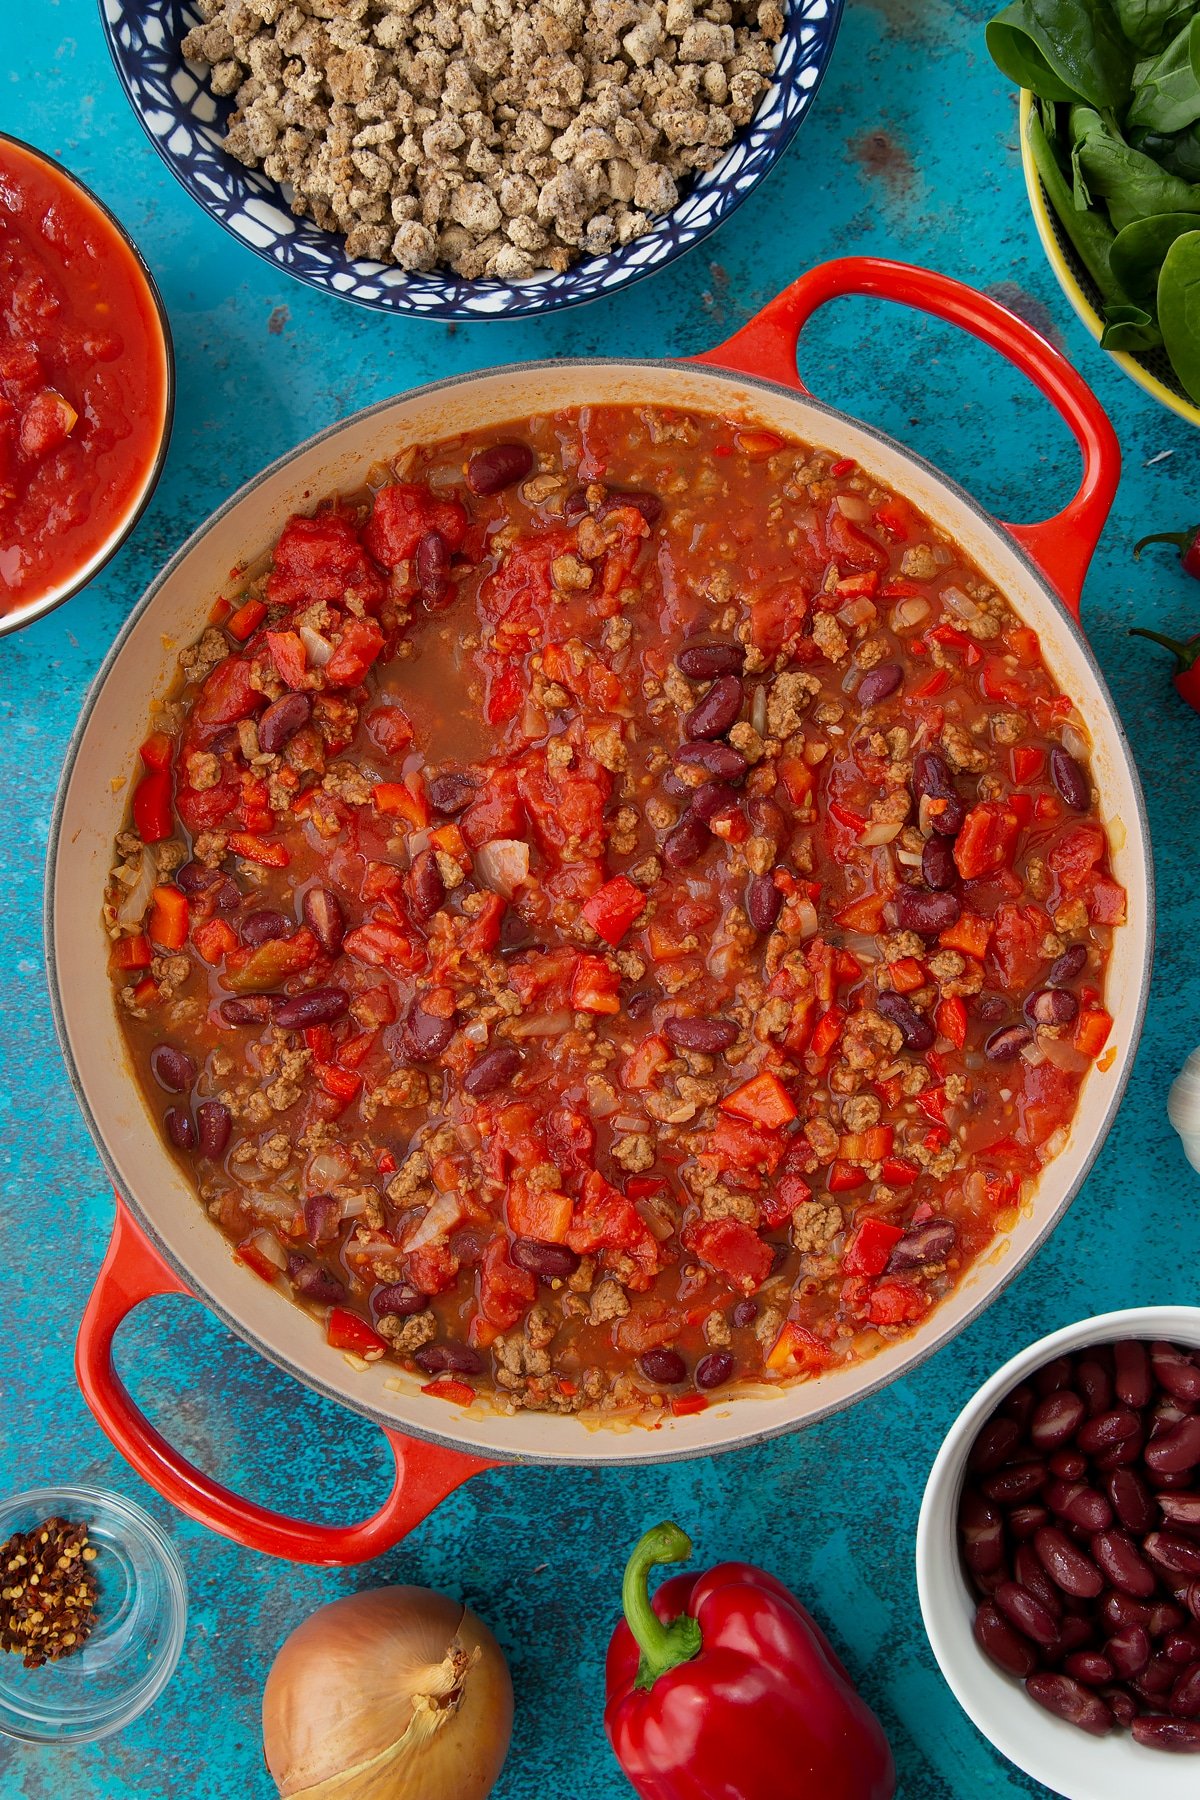 Half cooked vegetarian mince chilli in a pan. Ingredients to make vegetarian mince chilli surround the pan.